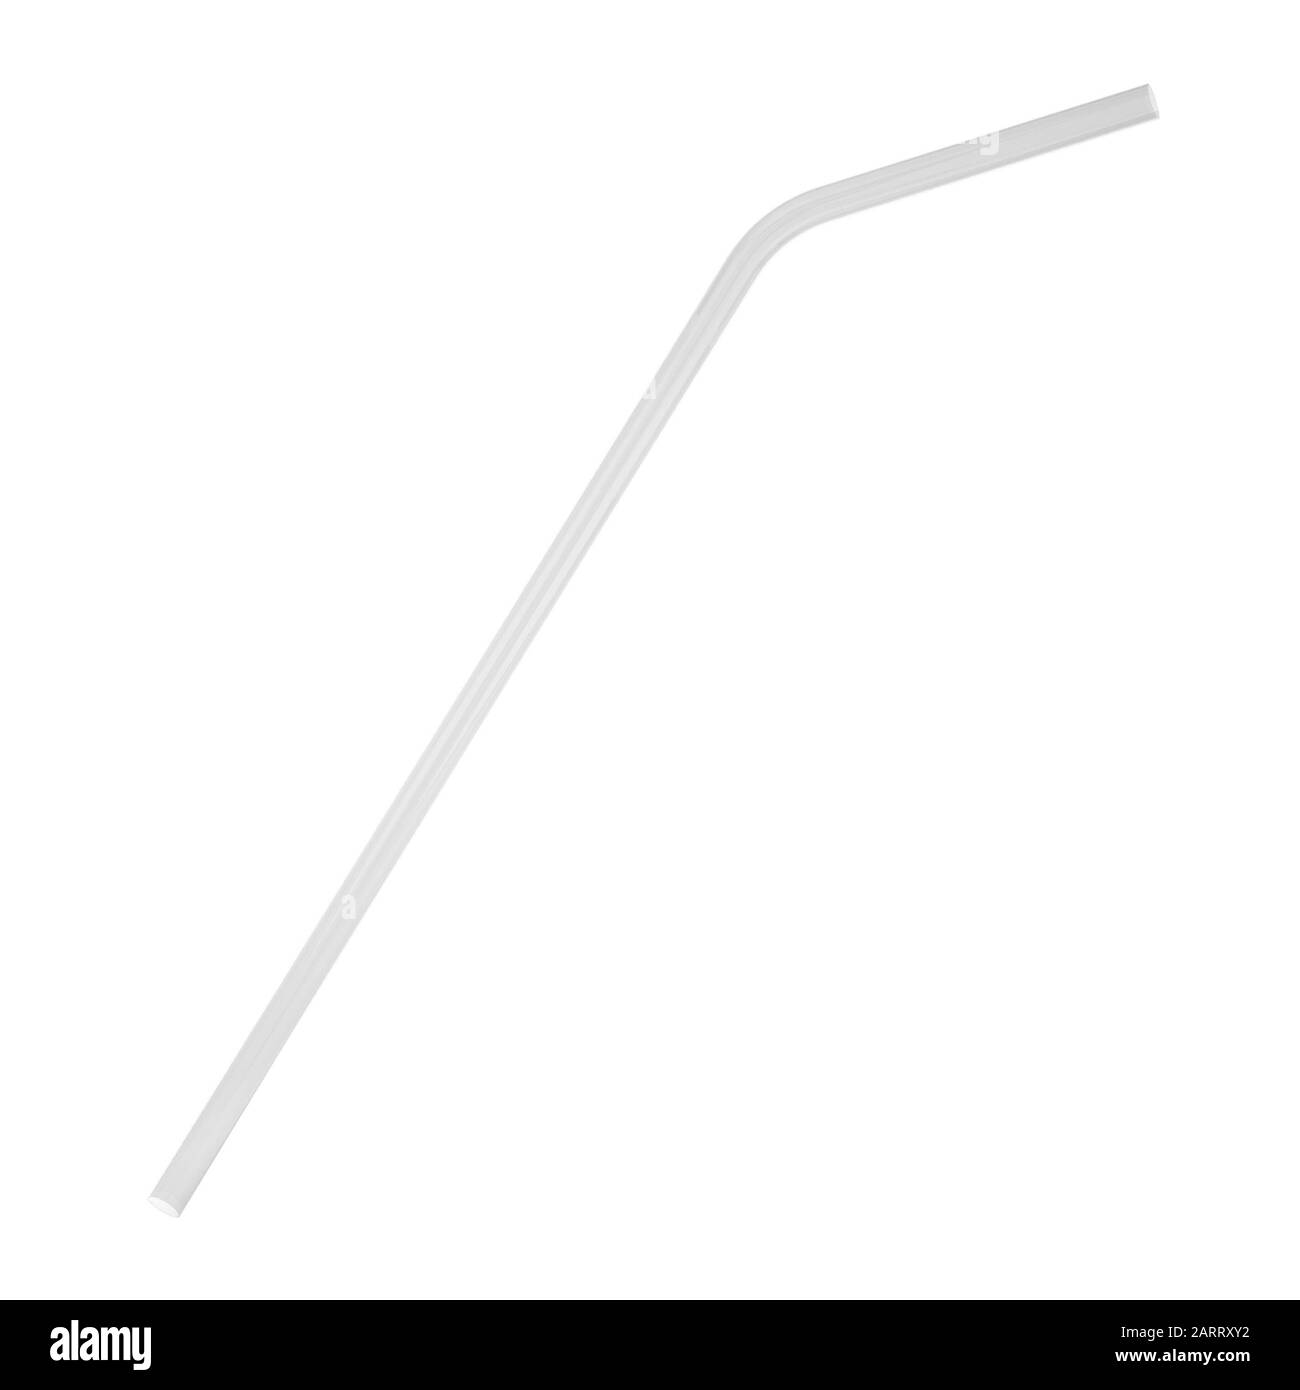 https://c8.alamy.com/comp/2ARRXY2/glass-straw-to-use-instead-of-plastic-one-3d-illustration-isolated-on-white-background-2ARRXY2.jpg